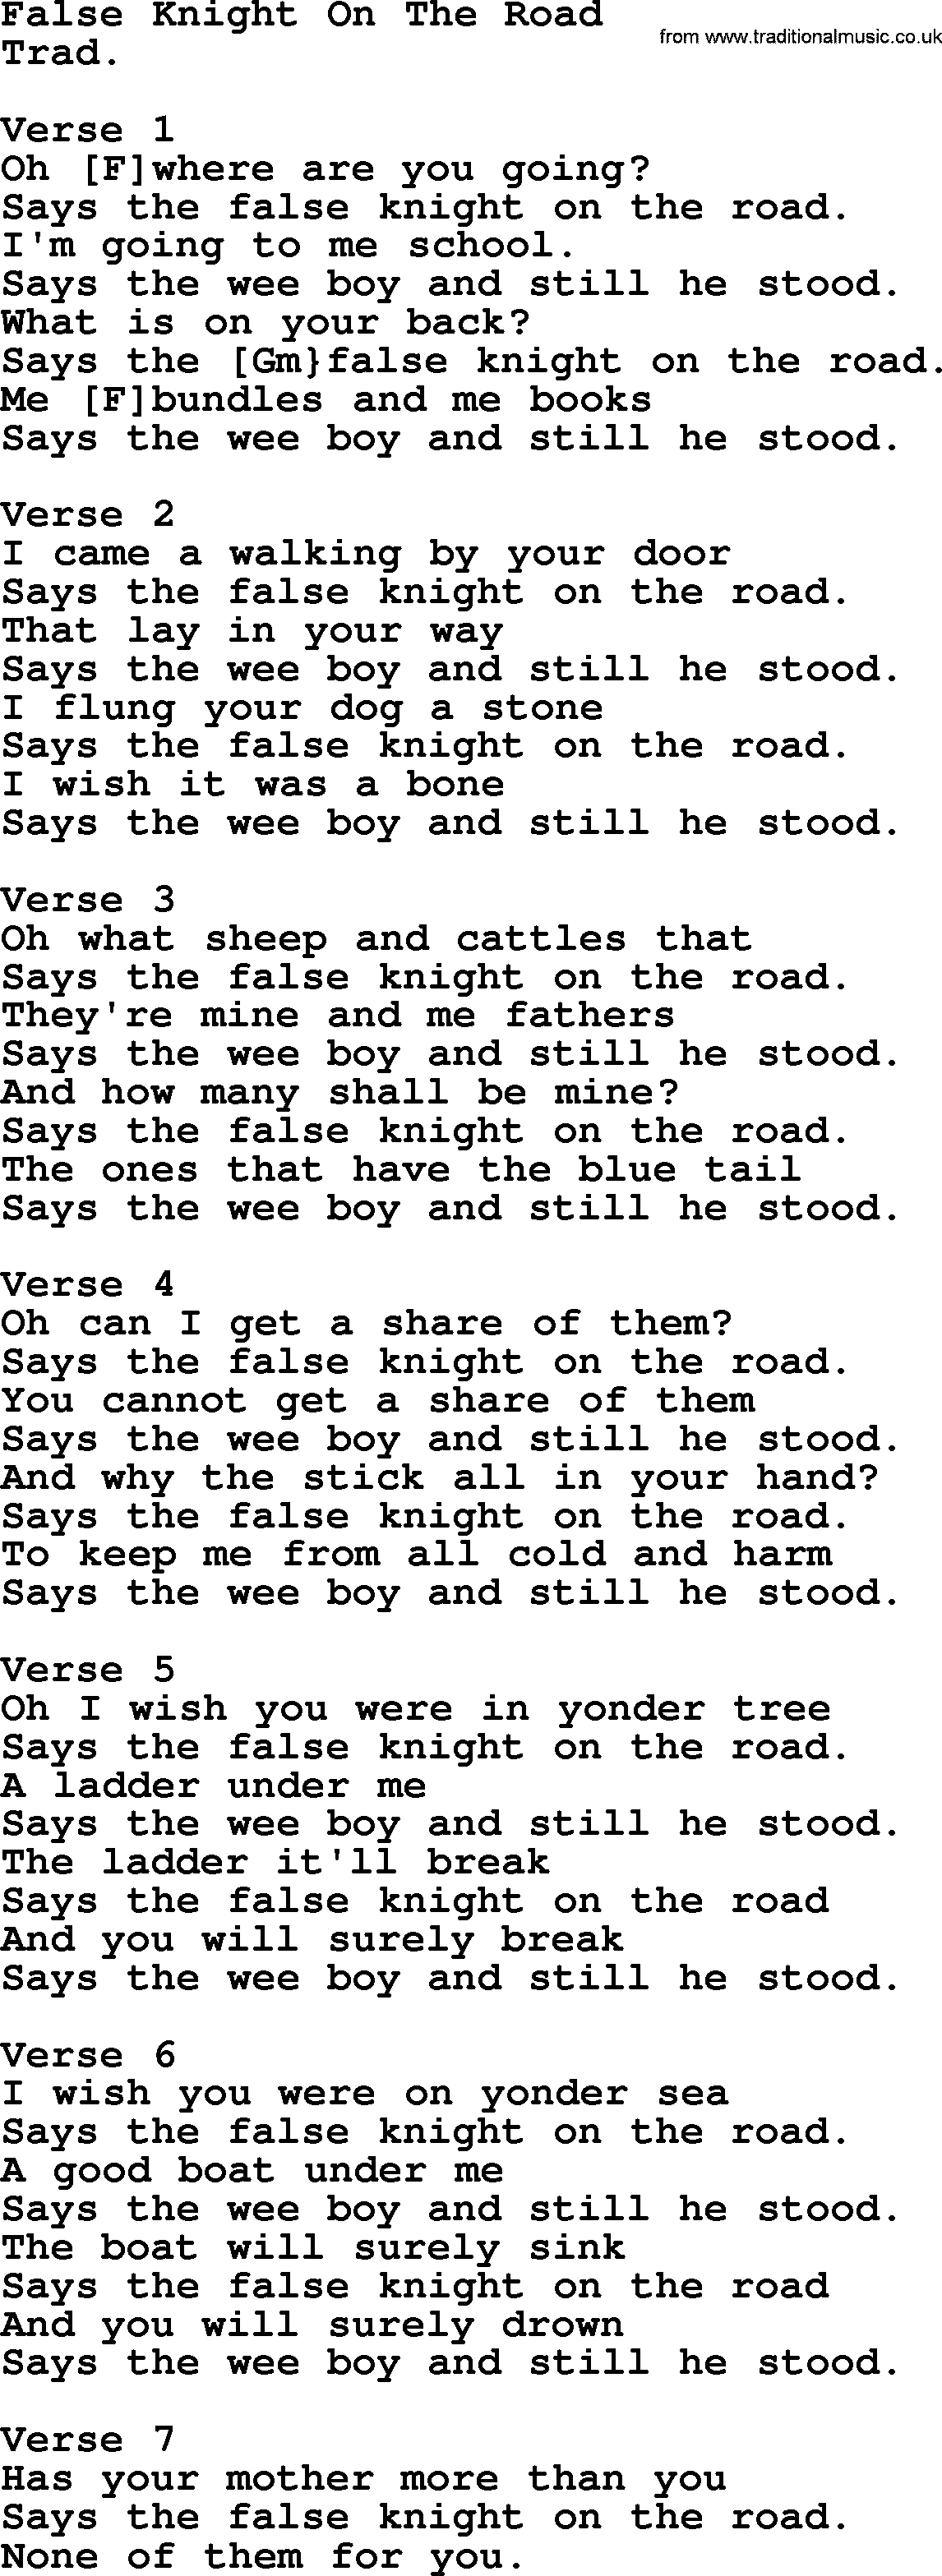 Top 1000 Most Popular Folk and Old-time Songs: False Knight On The Road, lyrics and chords